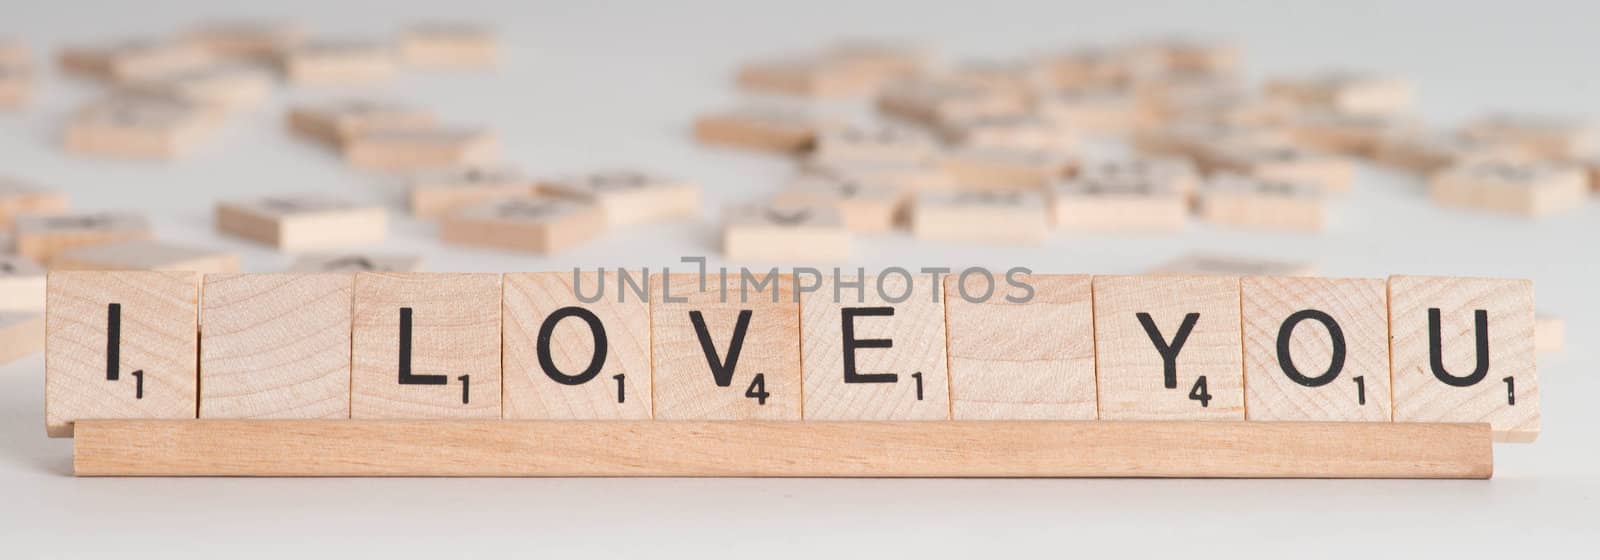 Wooden Scrabble letter spelling out phrase "I Love You".  Isolated on white background with light shadow.